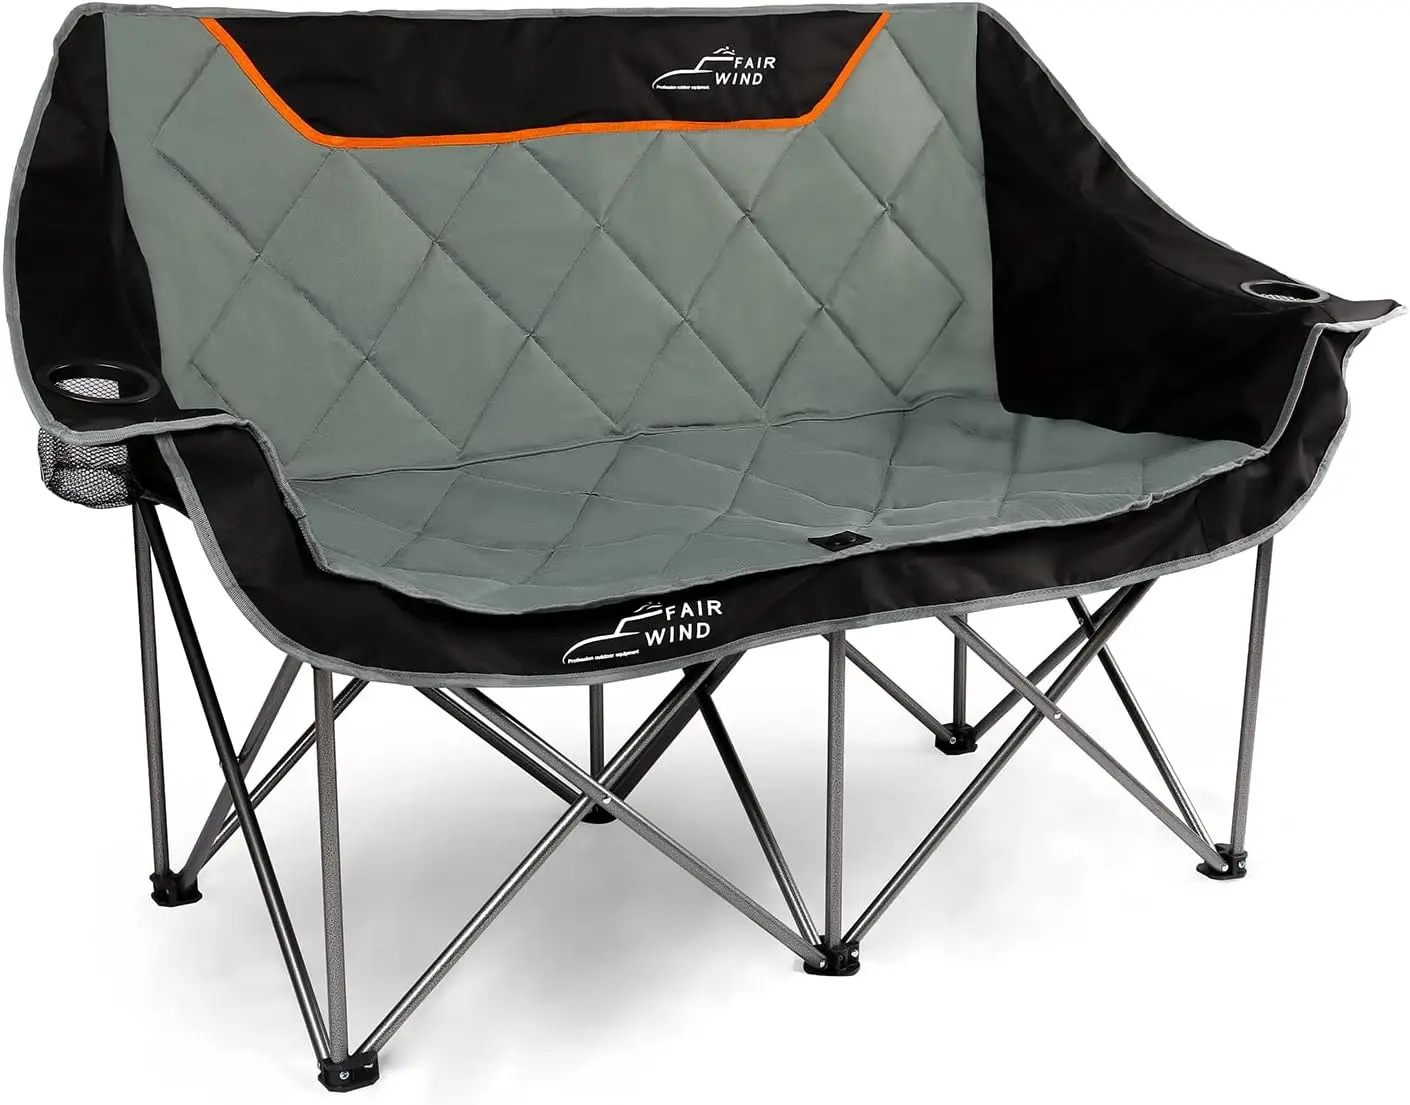 

Padded Camping Chair Folding Loveseat Double Duo Chair Heavy Duty Quad Fold Chair Arm Chair with Cup Hold - Supports 650 LBS Bla